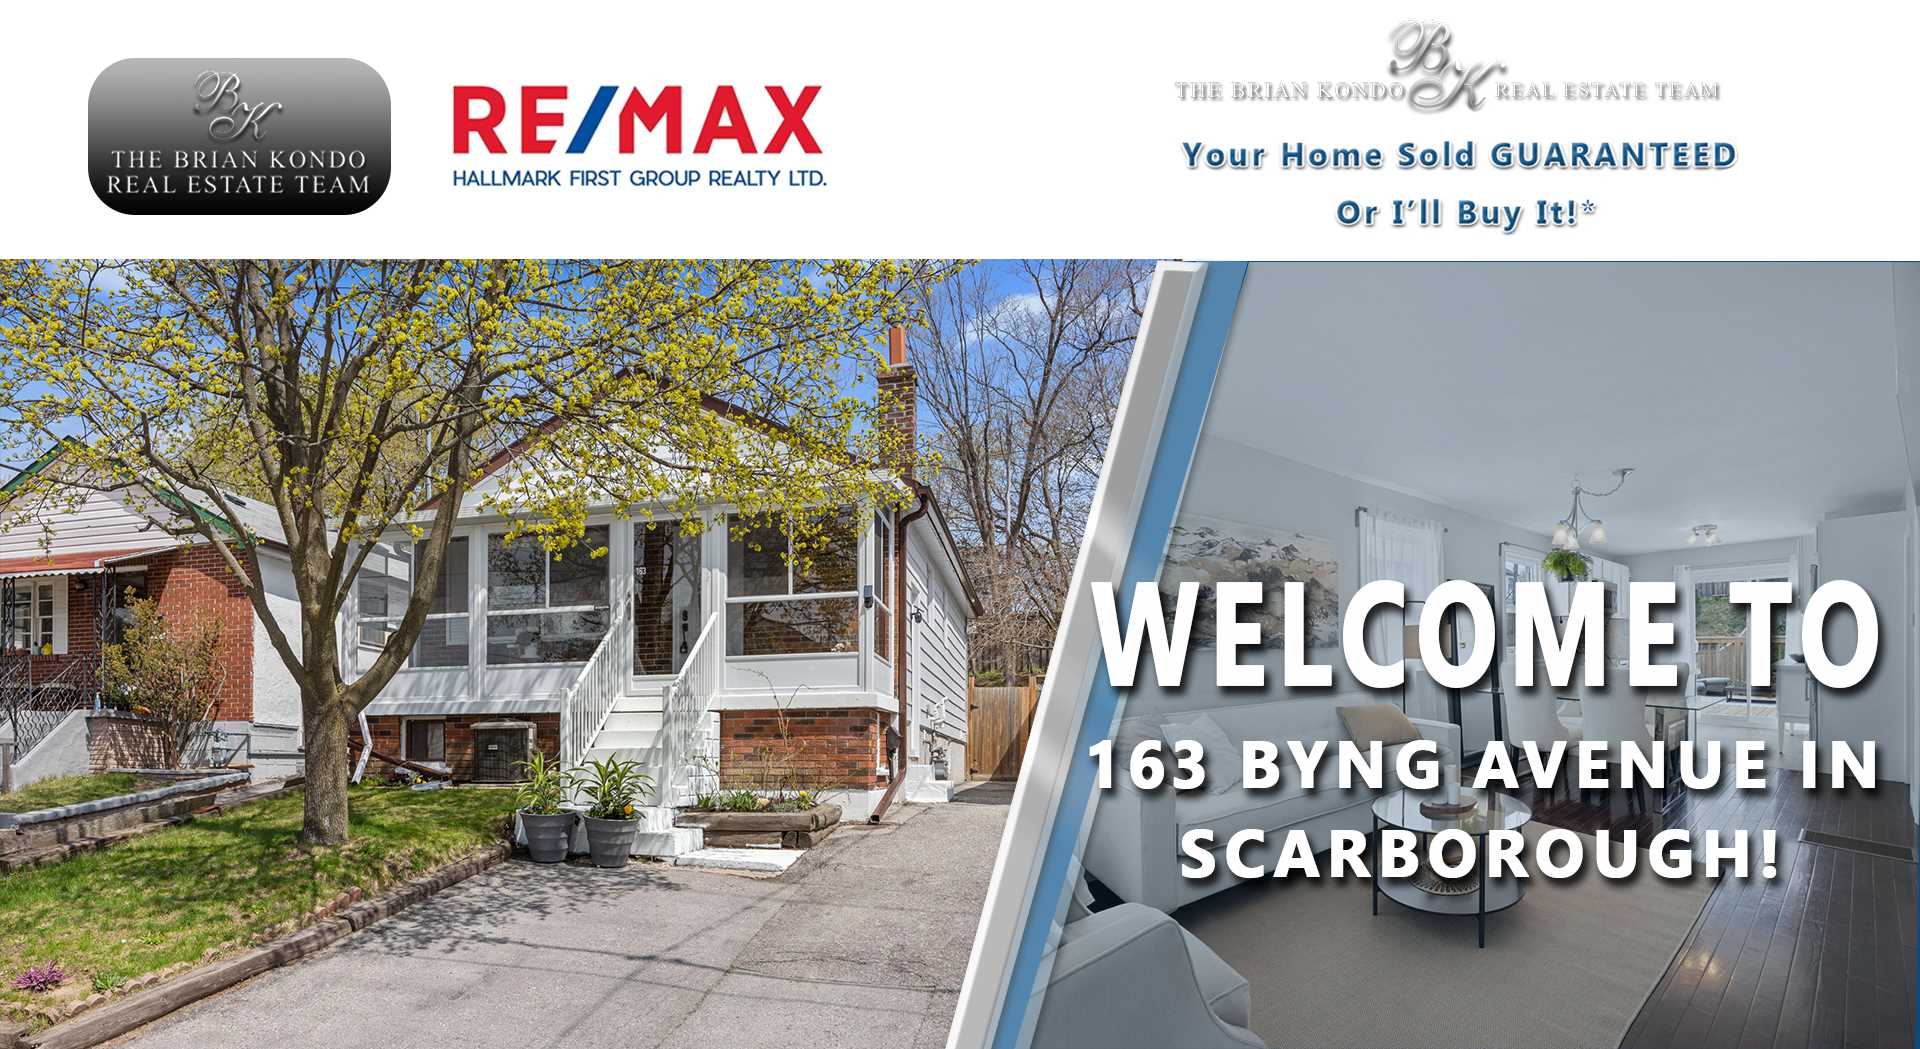 WELCOME TO 163 BYNG AVENUE IN SCARBOROUGH! | The Brian Kondo Real Estate Team